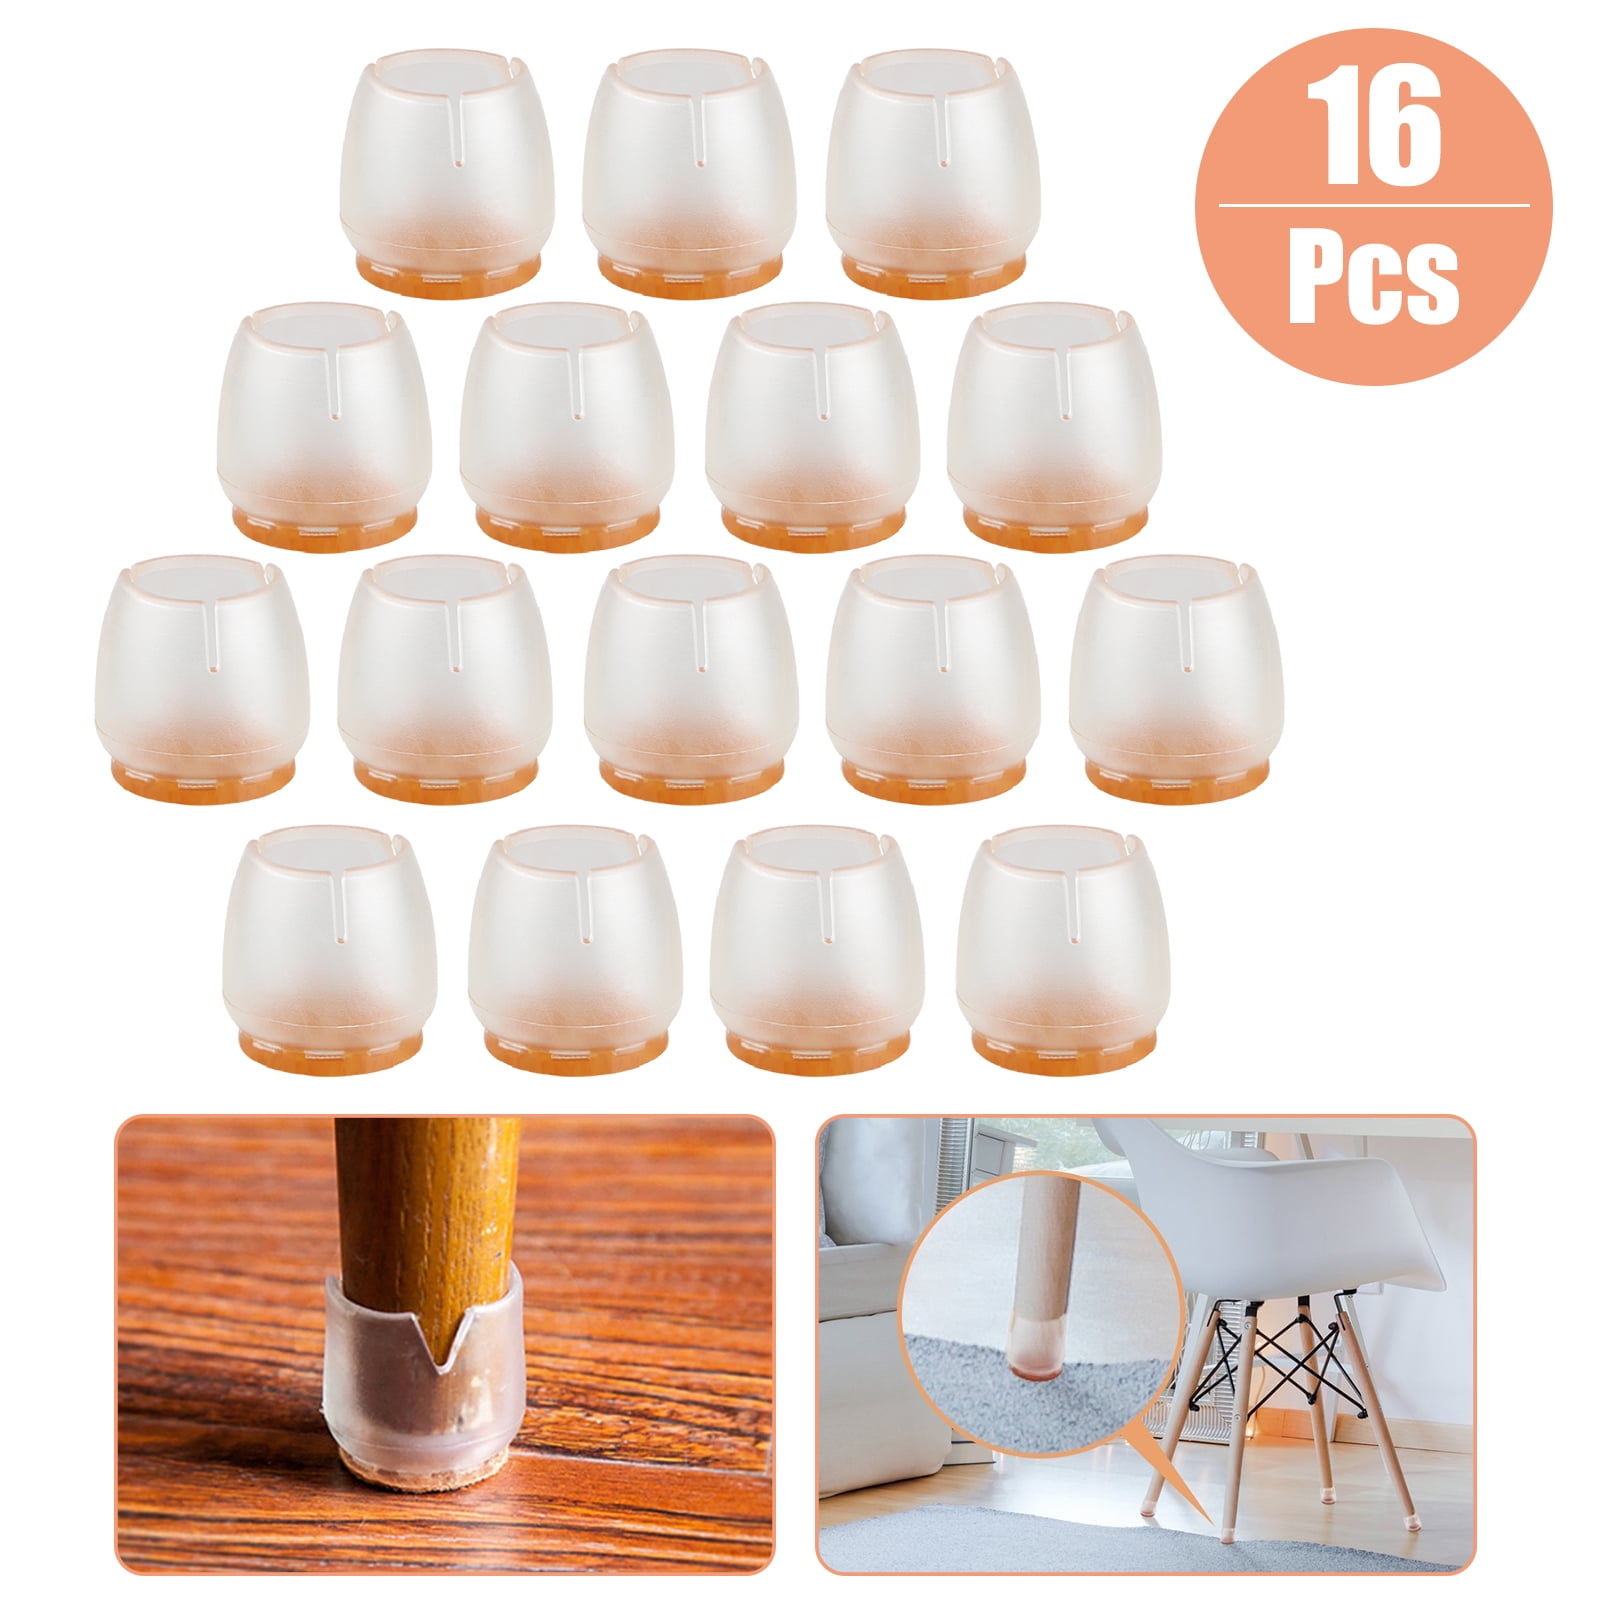 16pcs Furniture Table Cover Square Chair Leg Cap Feet Silicone Protector Pads 